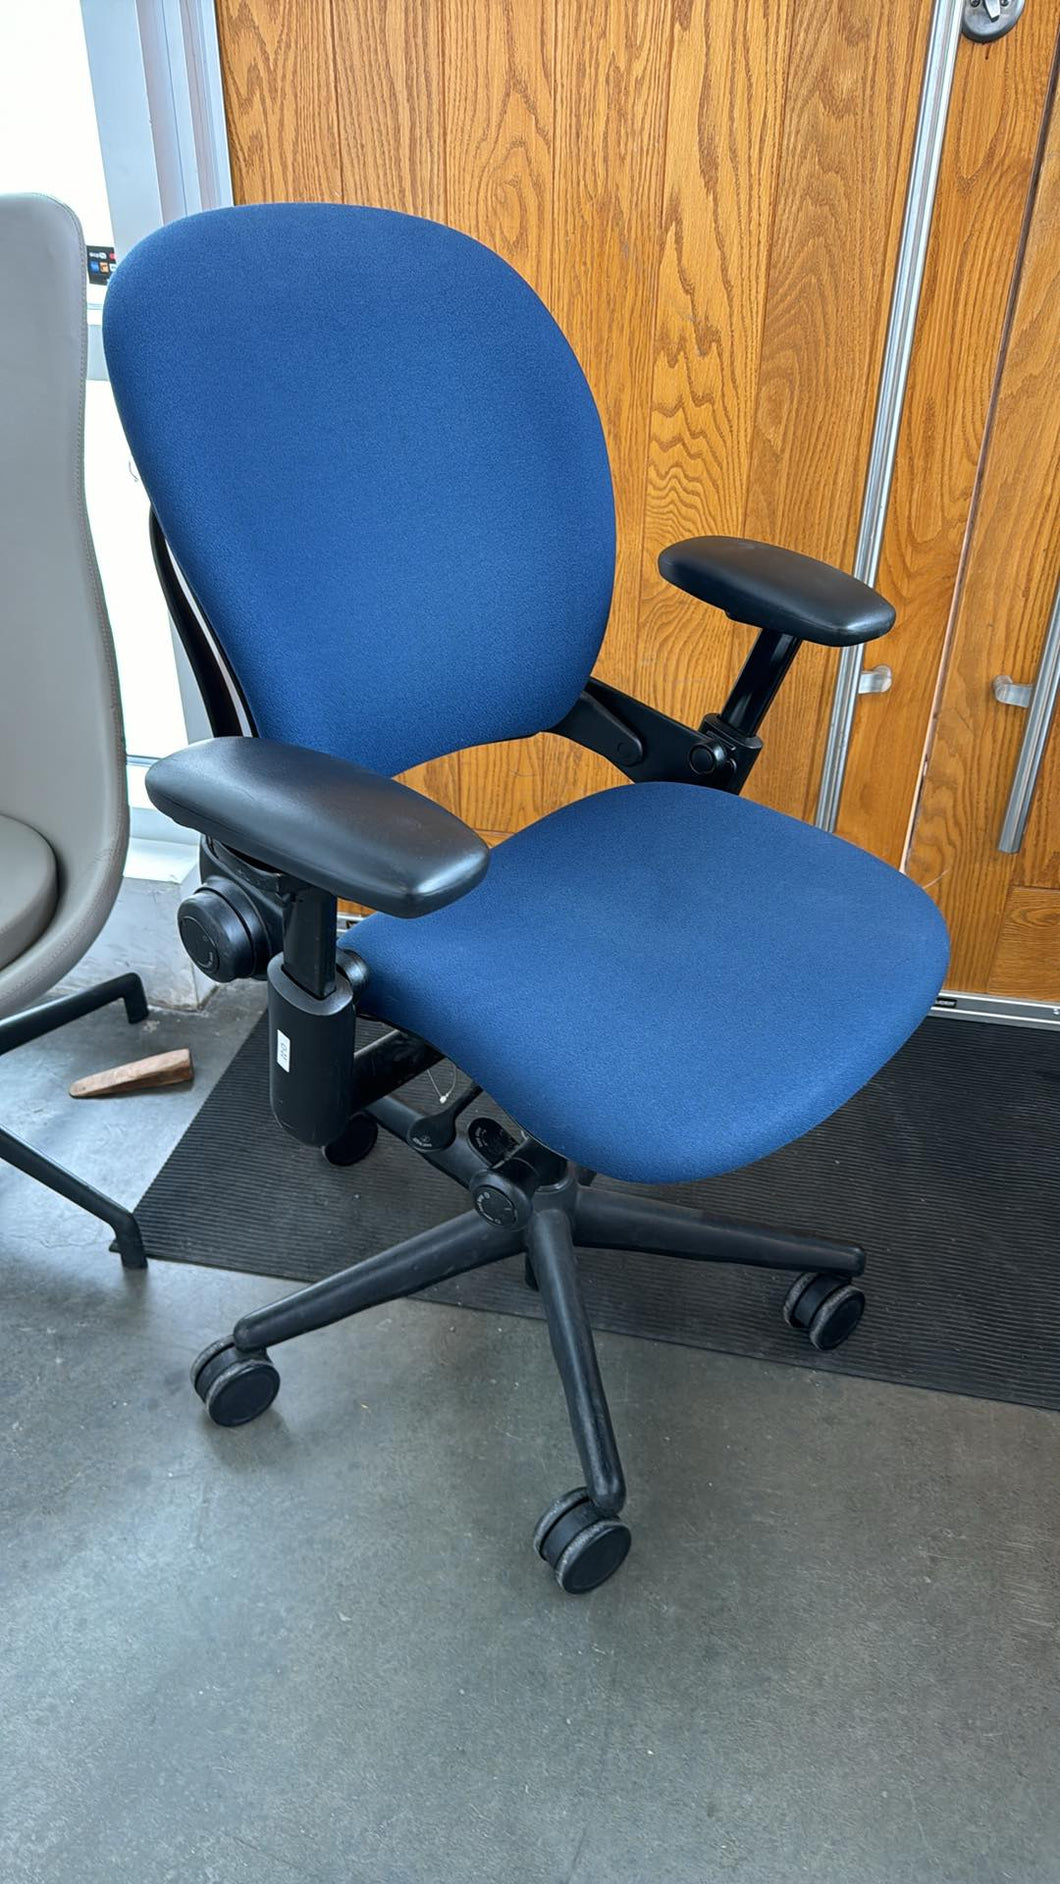 Used Steelcase Leap V1 Ergonomic Office Chairs - Fully Loaded